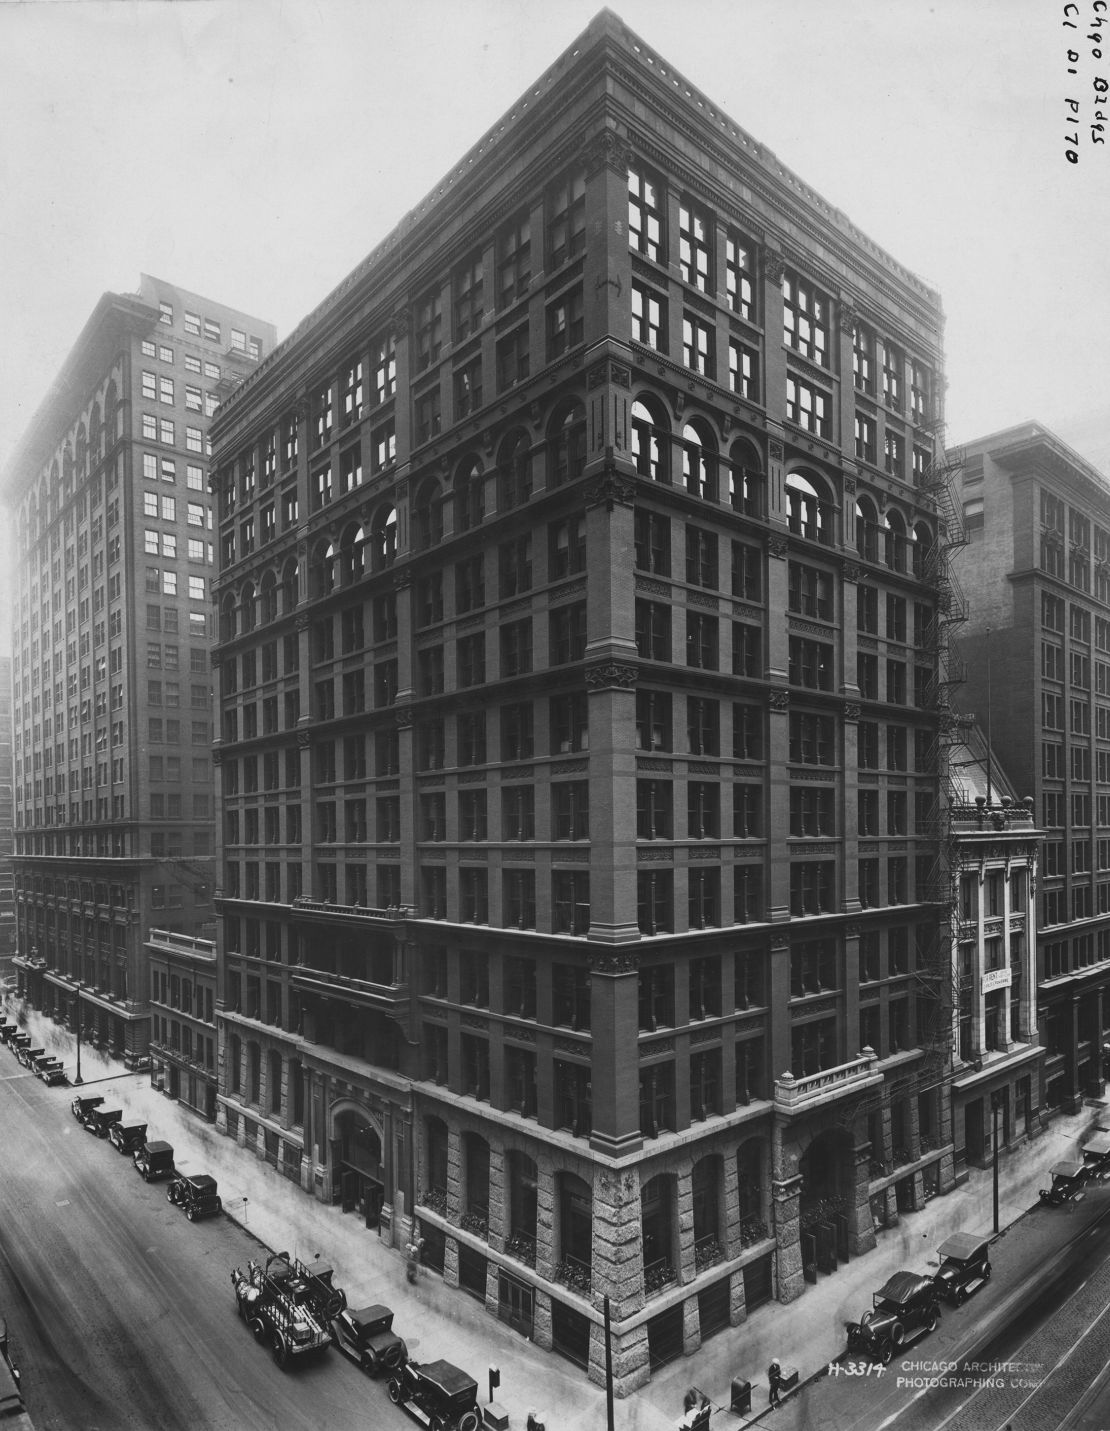 The Home Insurance Building, Chicago, 1926.The building was demolished in 1931.